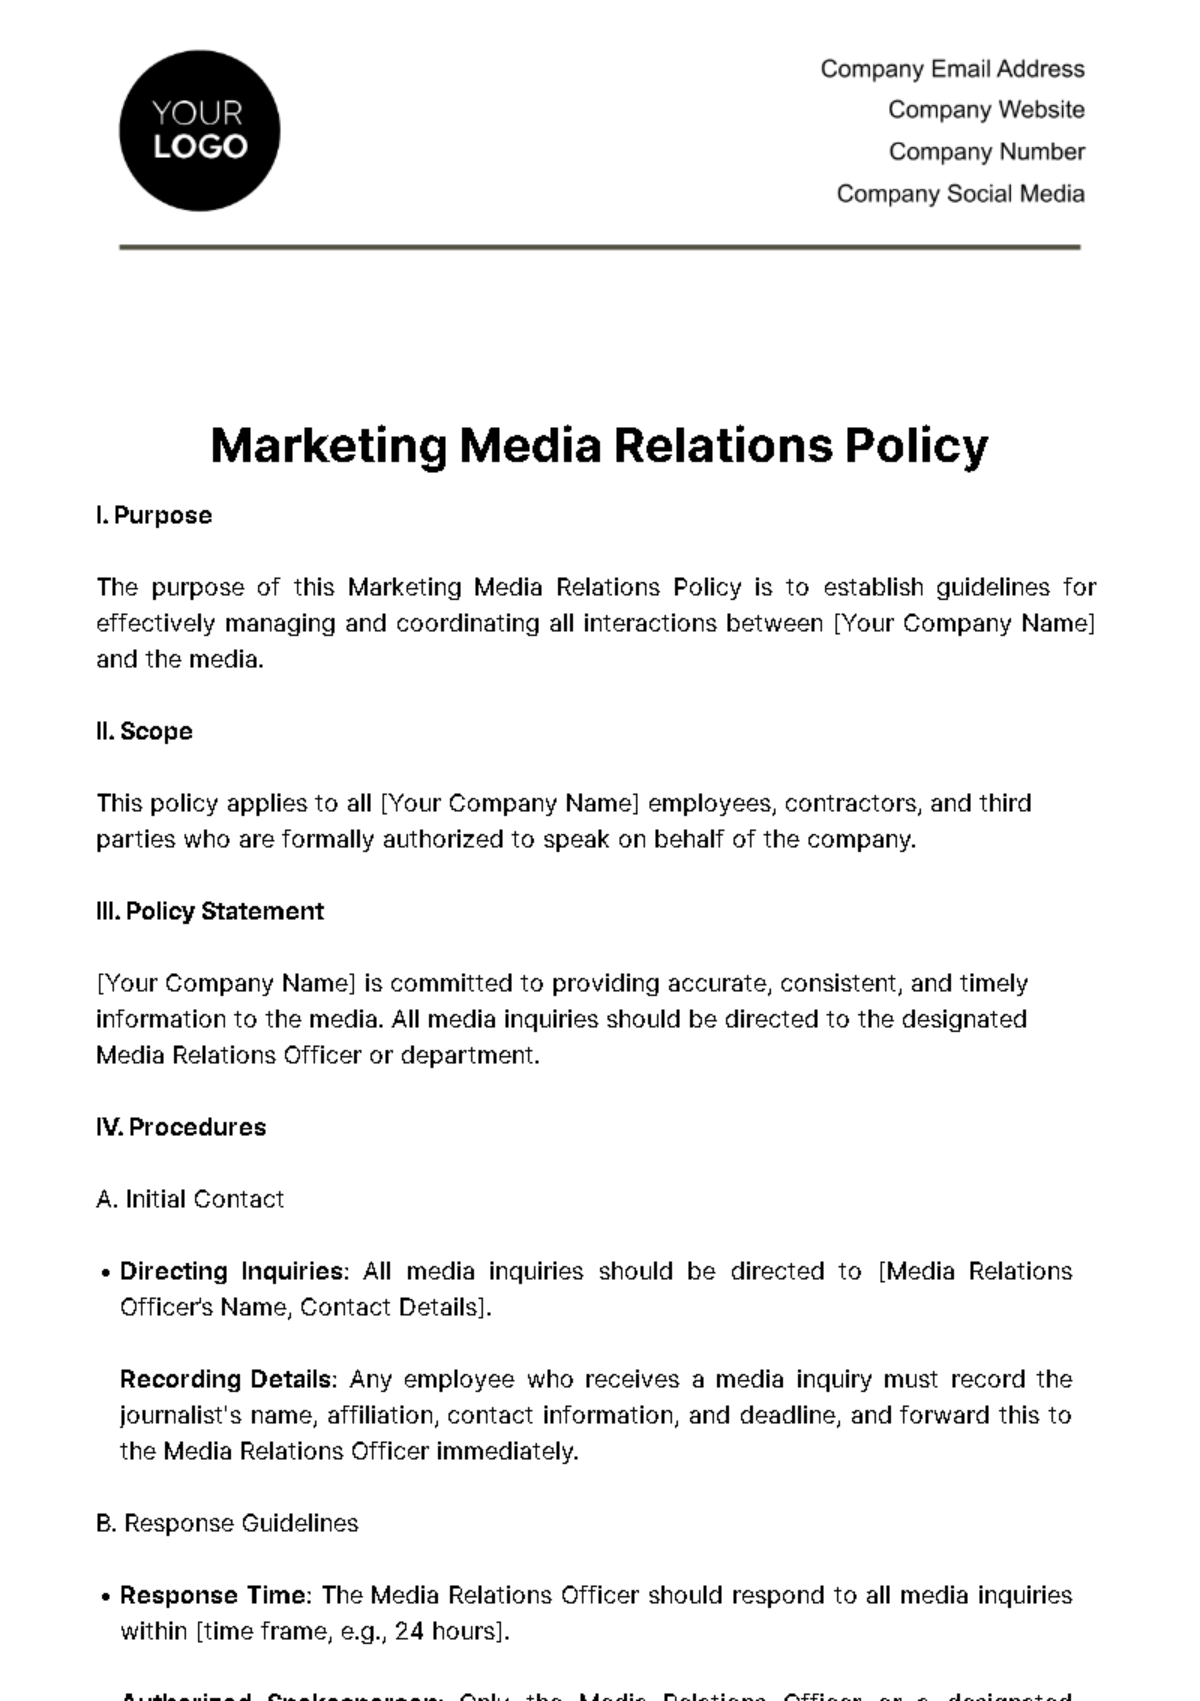 Marketing Media Relations Policy Template